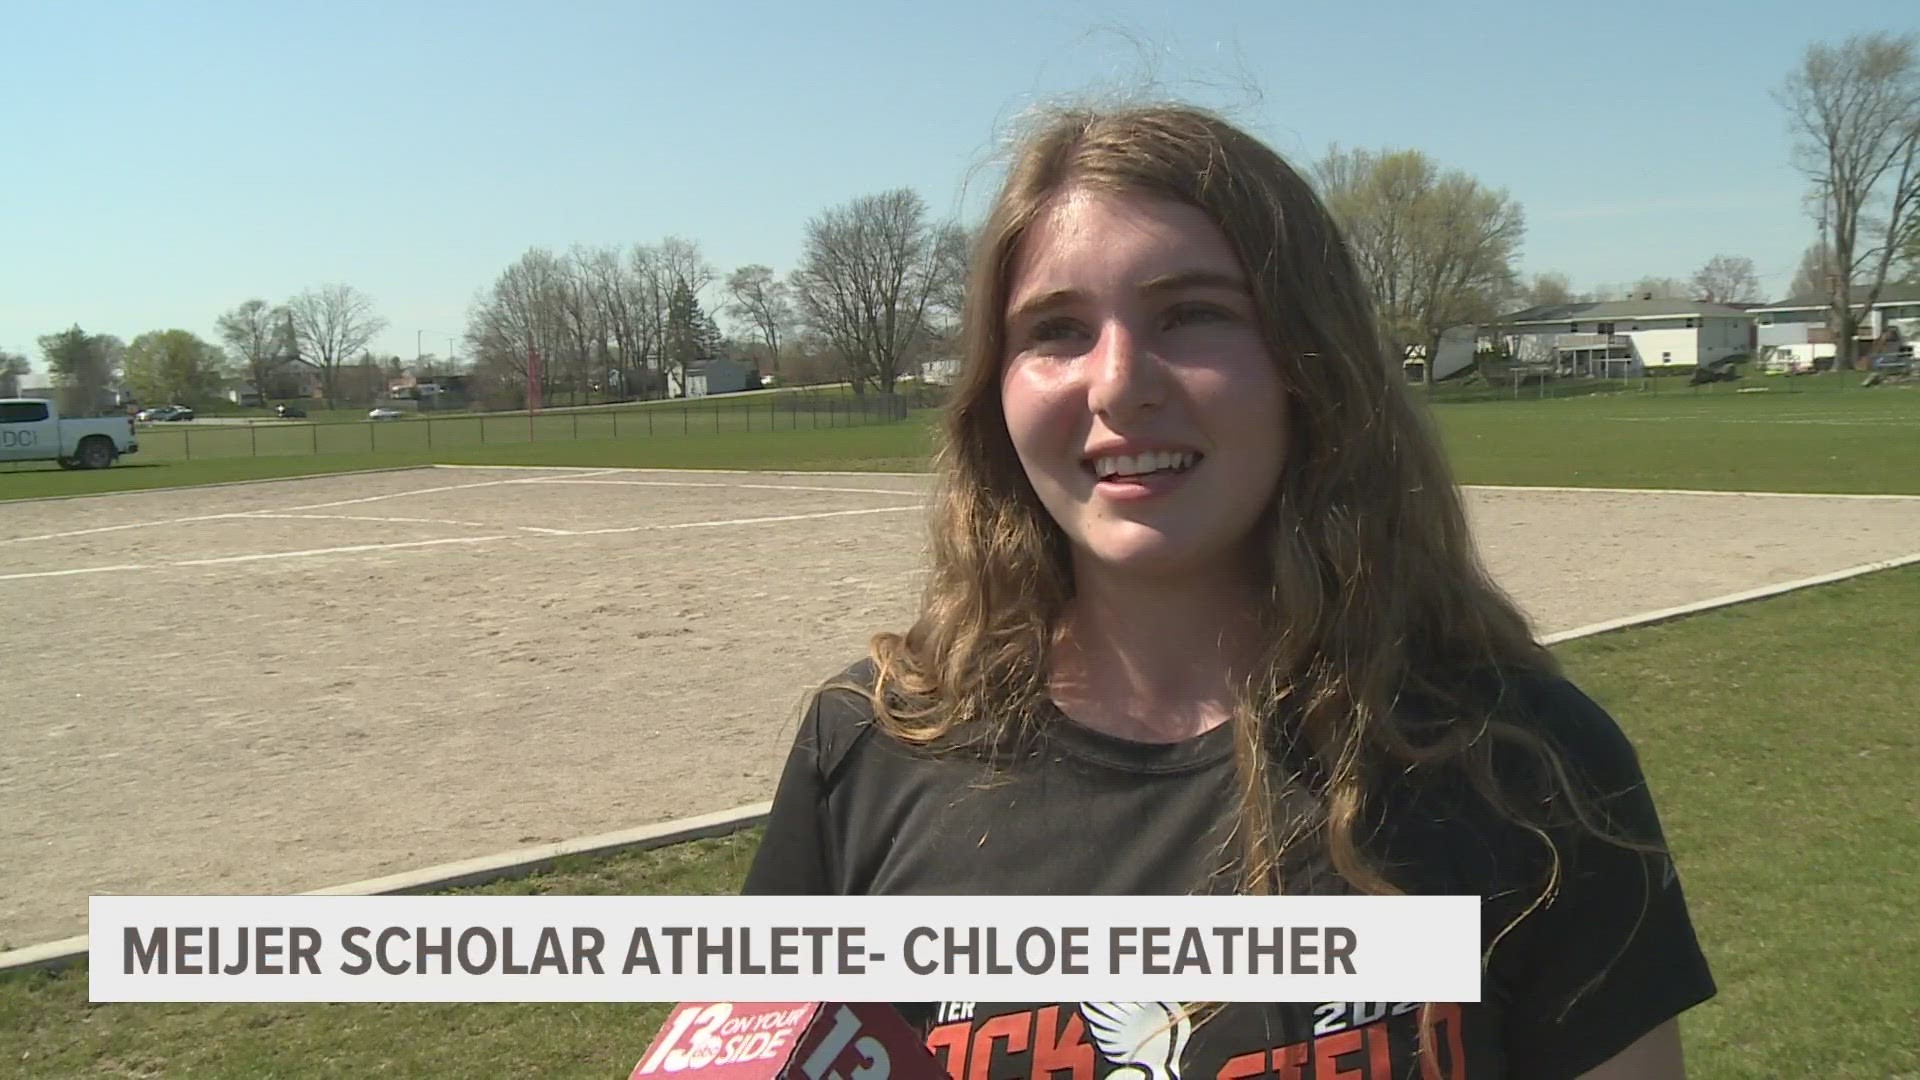 Feather says being well rounded has helped her excel in the classroom.